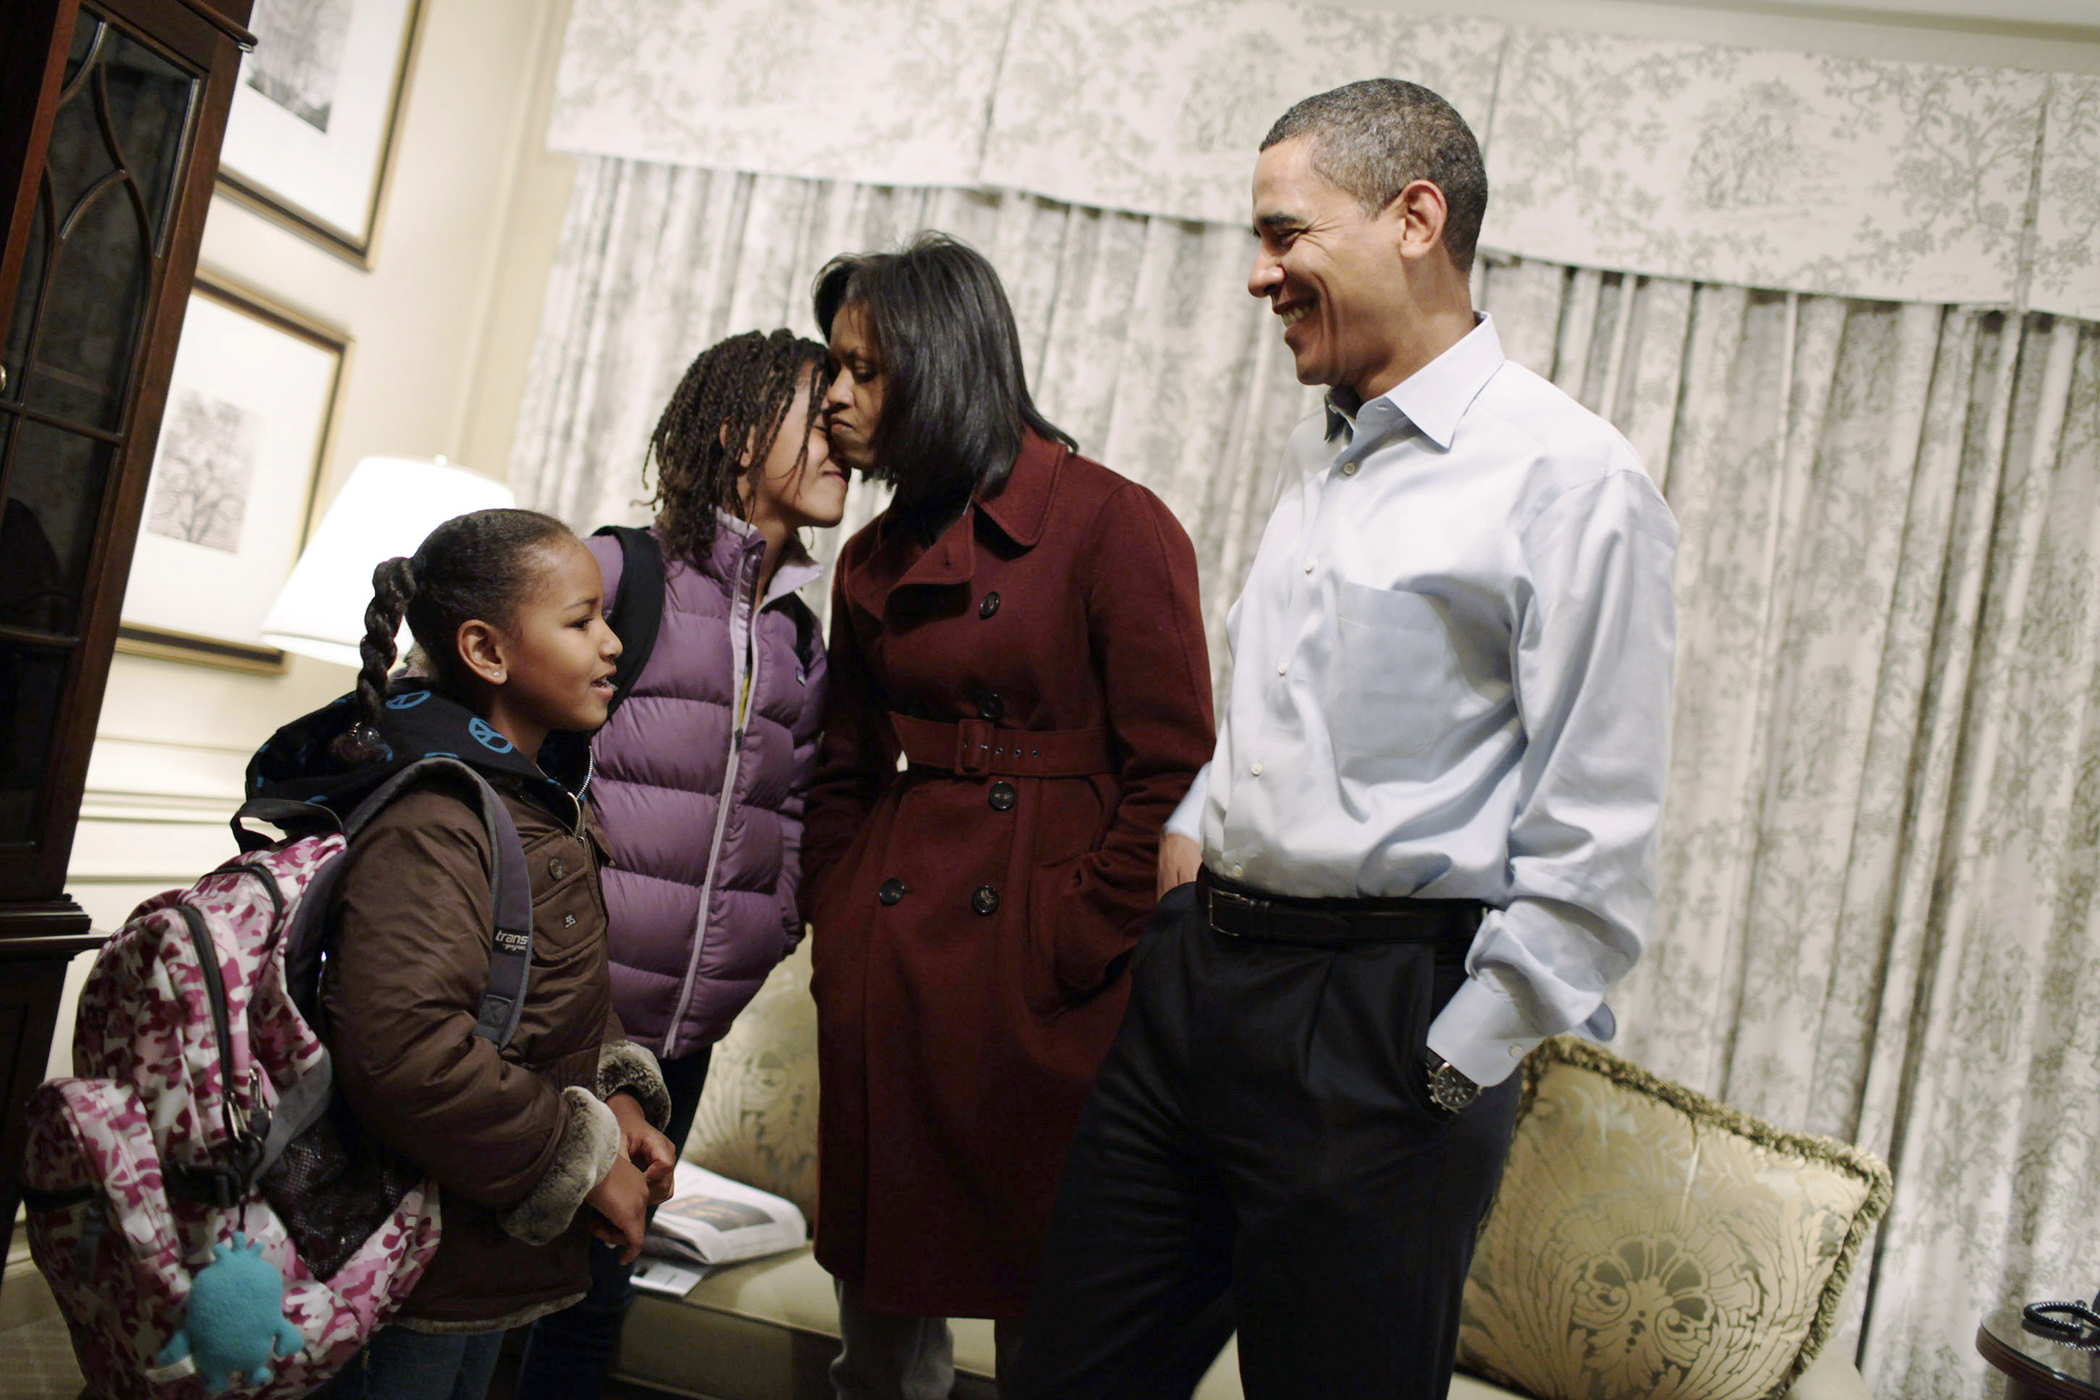 U.S. President elect Barack Obama and Michelle Obama get their daughters Sasha (L) and Malia (second from left) ready for their first day of school at Sidwell Friends in Washington January 5, 2009. The Obama family is staying at the Hay Adams Hotel in Washington until they move to Blair House, and then to the White House on January 20, 2009.